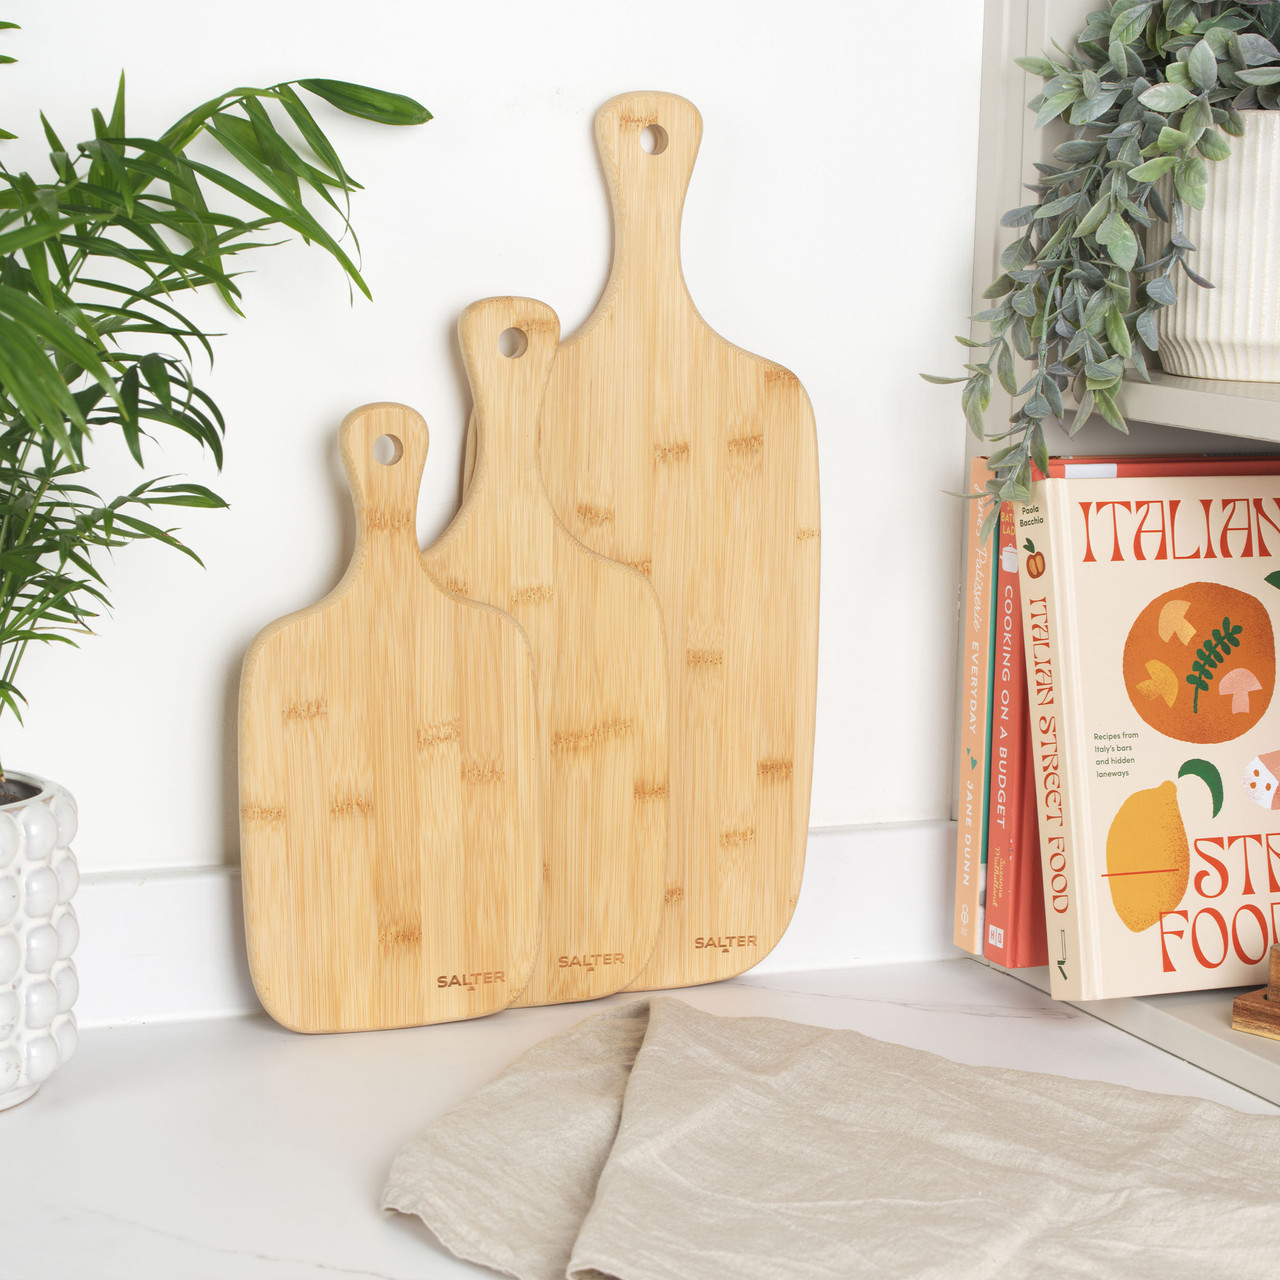 https://cdn11.bigcommerce.com/s-5vfc75n1yv/images/stencil/1280x1280/products/685/6897/salter-bamboo-paddle-chopping-board-set__00286.1648458158.jpg?c=1